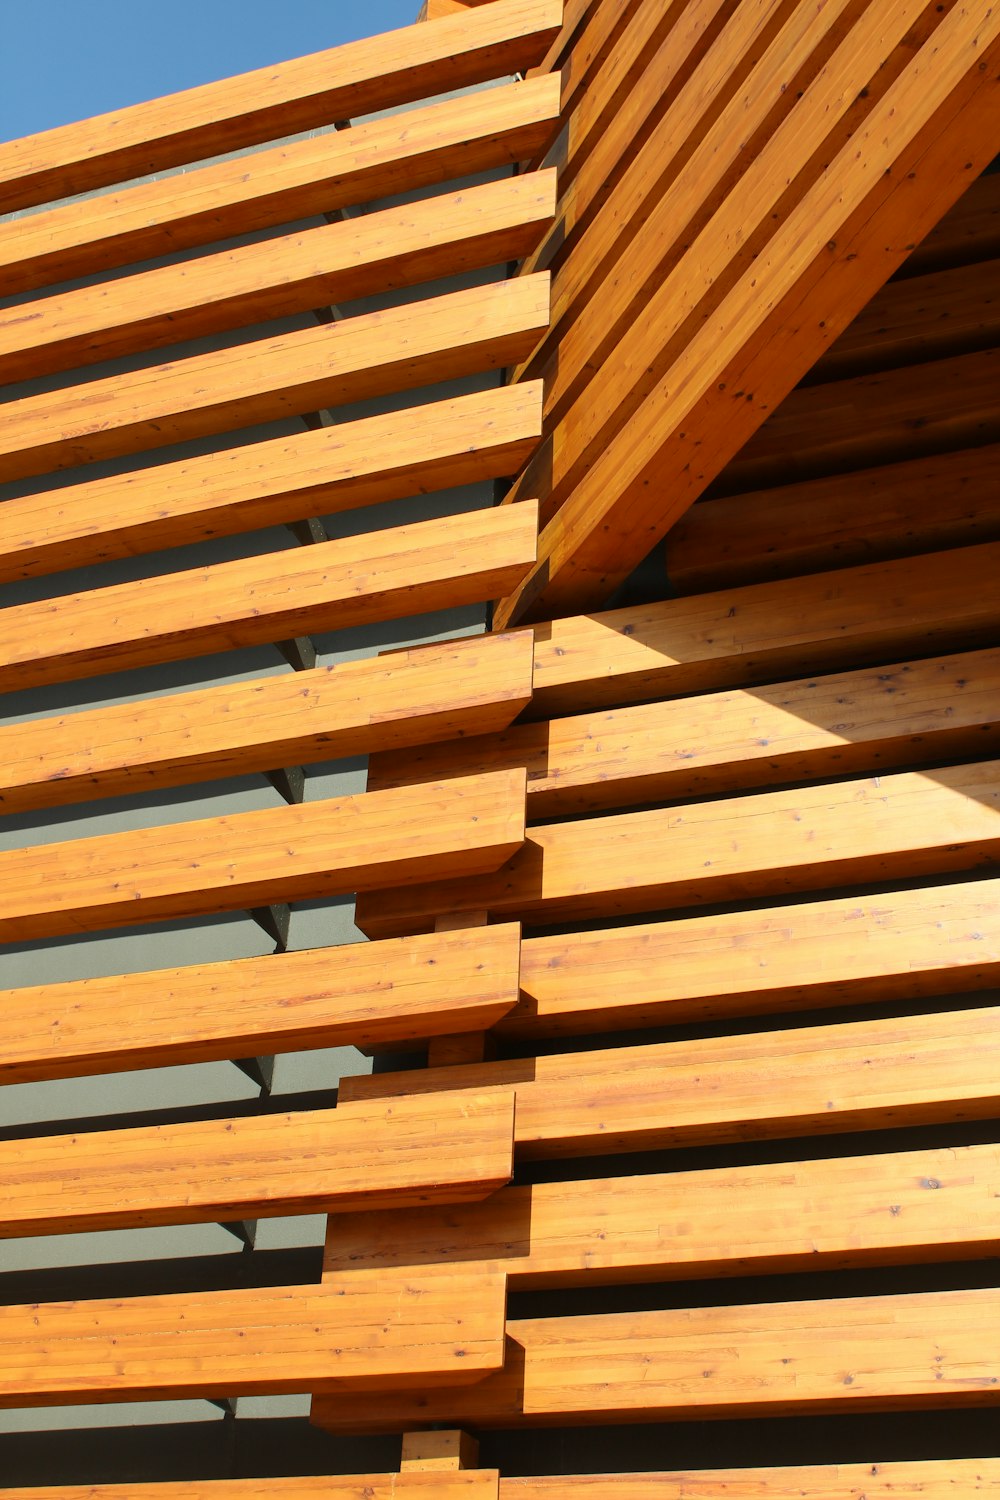 a close up of a wooden structure against a blue sky